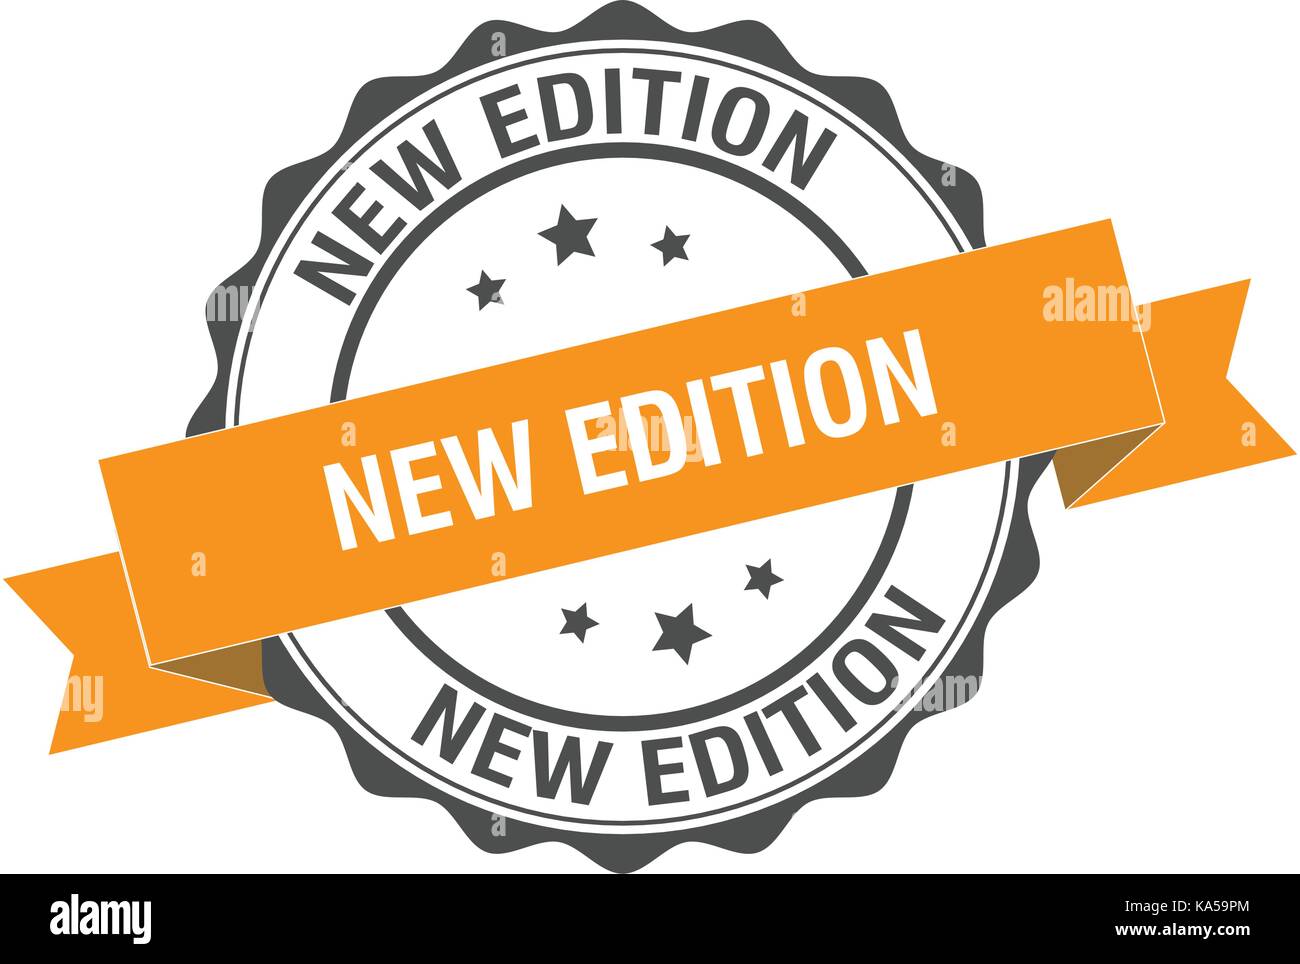 New edition stamp illustration Stock Vector